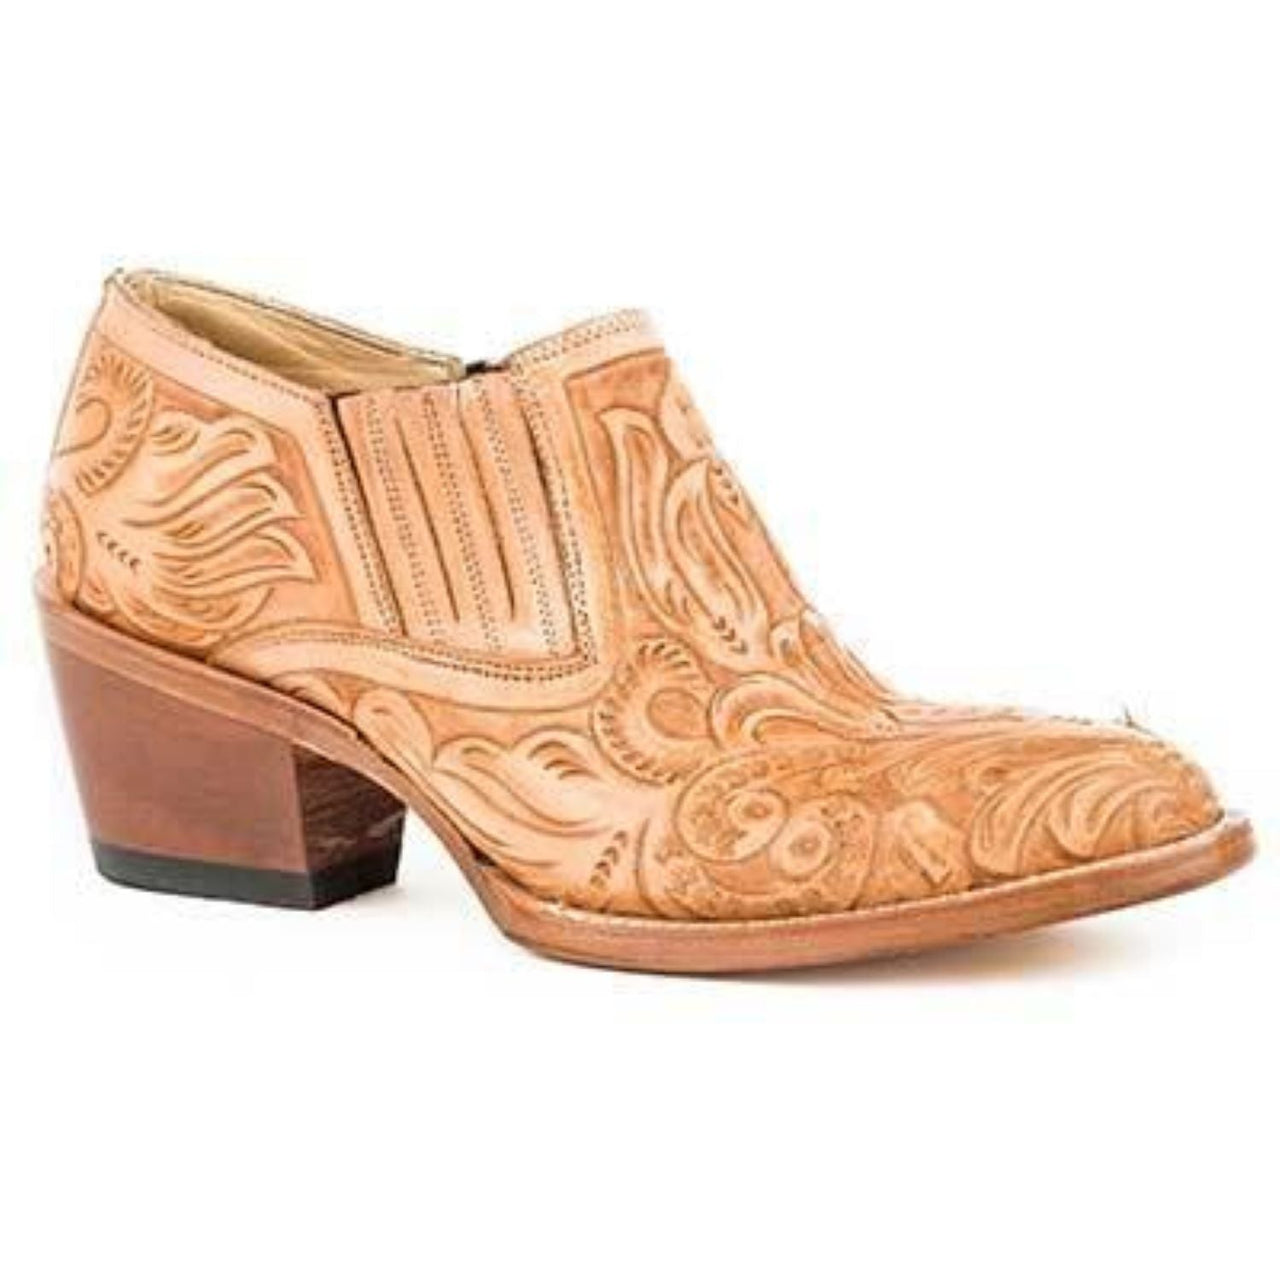 Women's Stetson Nina Leather Boots Handcrafted Tan - yeehawcowboy